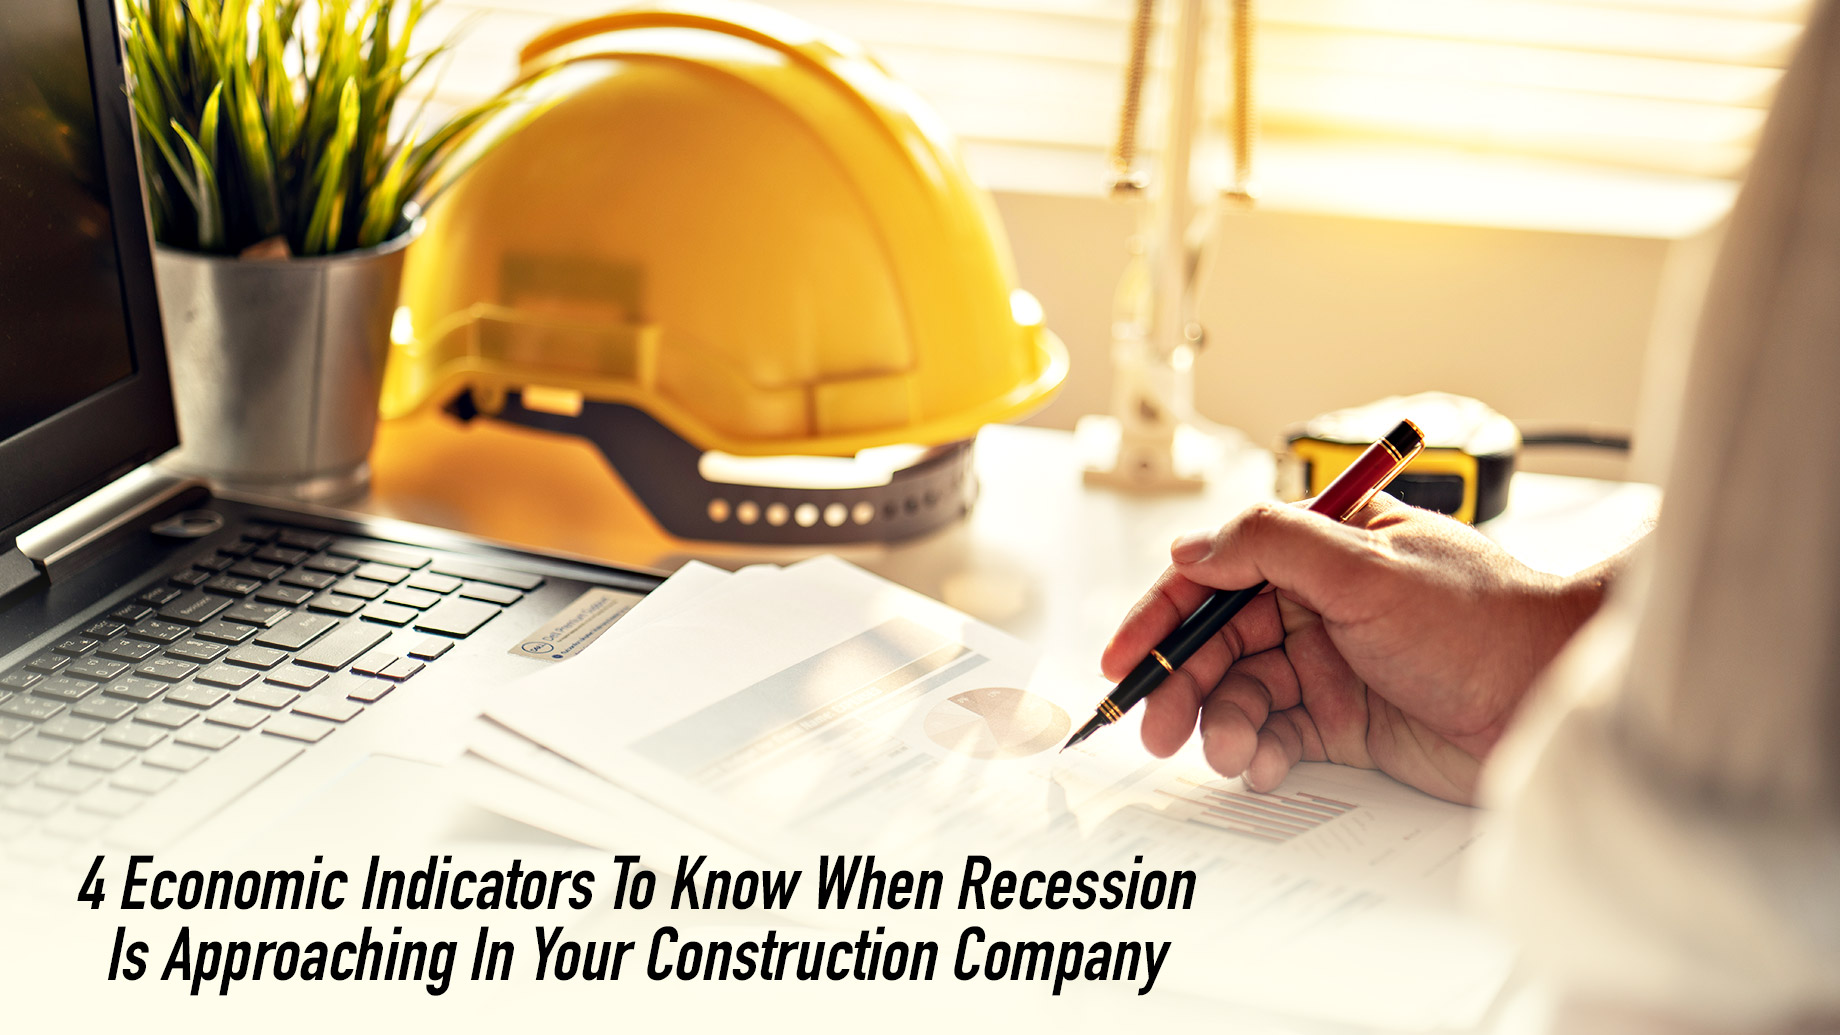 4 Economic Indicators To Know When Recession Is Approaching In Your Construction Company